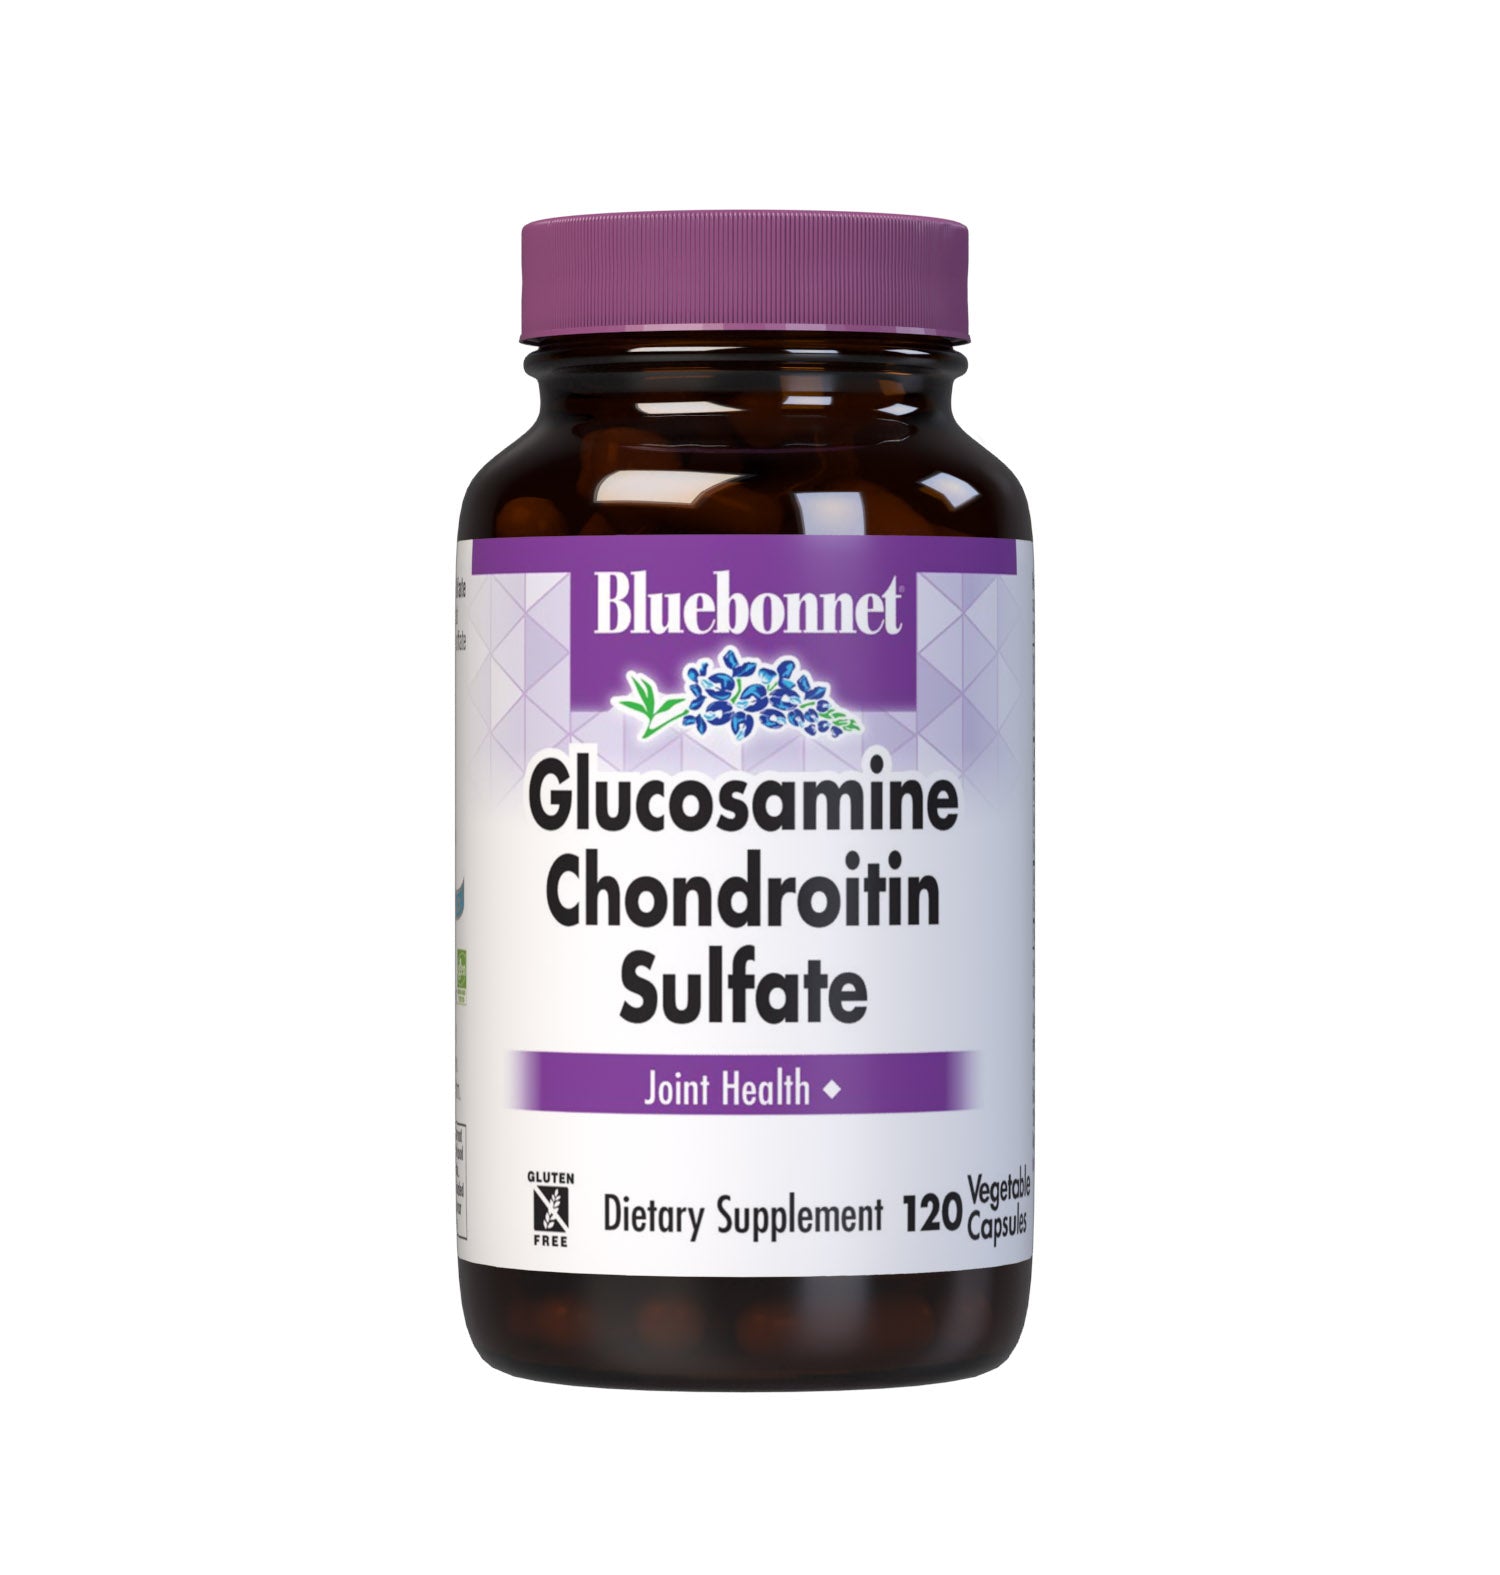 Bluebonnet’s Glucosamine Chondroitin Sulfate 120 Vegetable Capsules are specially formulated with glucosamine sulfate and pure chondroitin sulfate for optimal joint health. #size_120 count